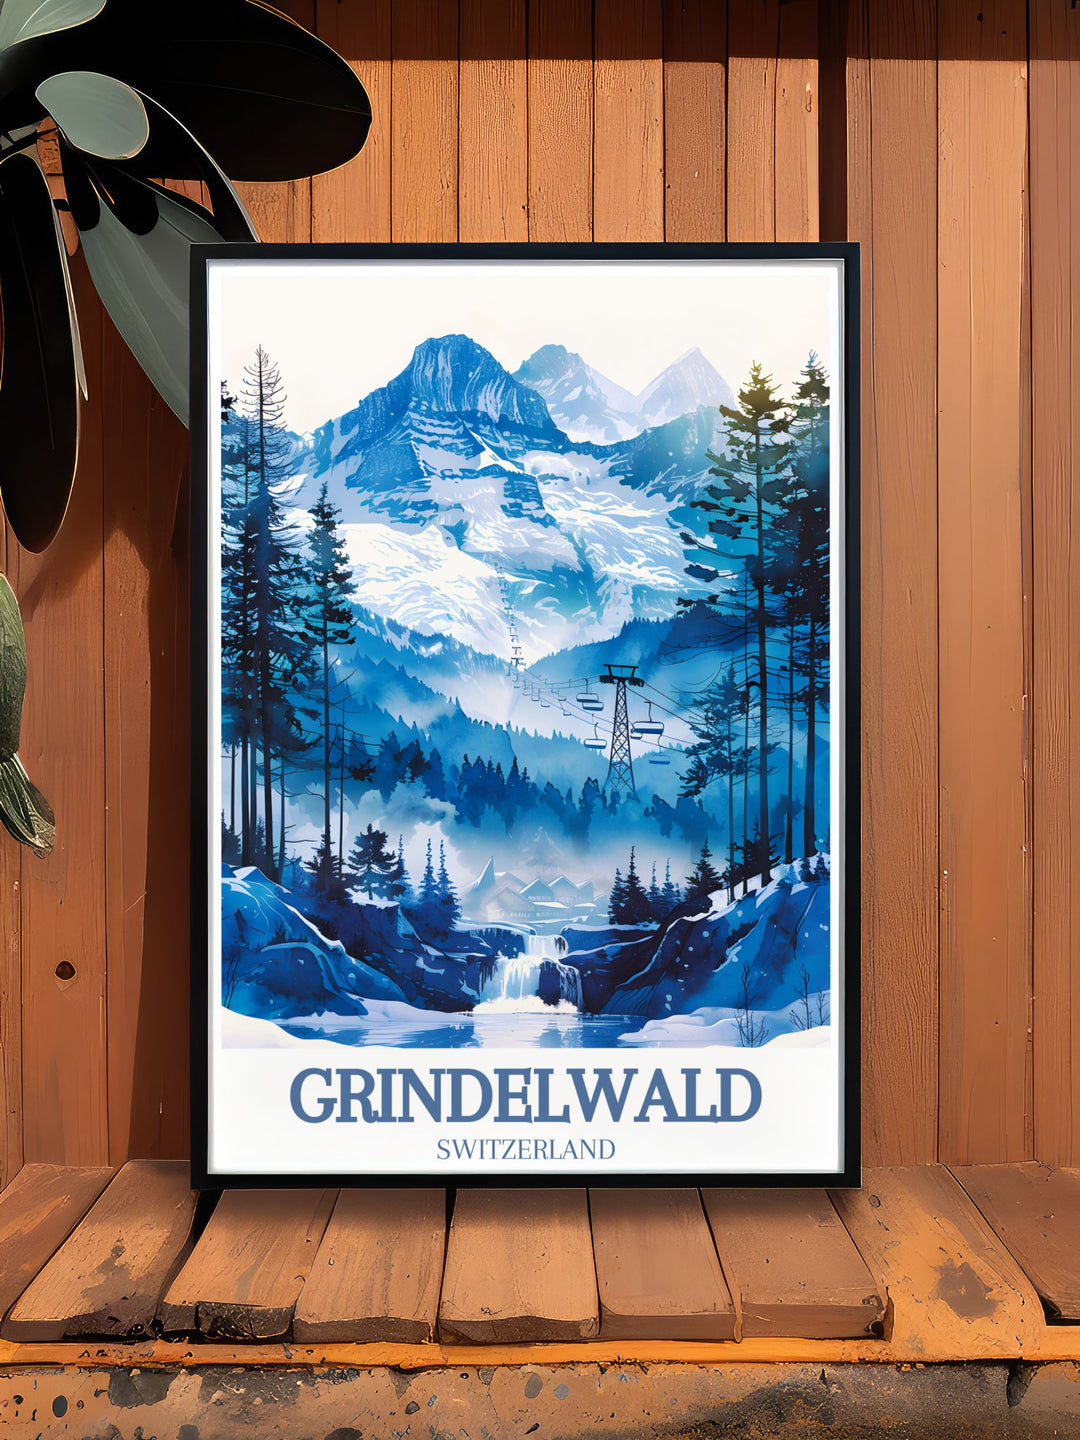 Showcasing the winter wonderland of the Jungfrau Ski Region, this travel poster features detailed illustrations of the snowy slopes and alpine scenery, perfect for creating a serene atmosphere in any room.